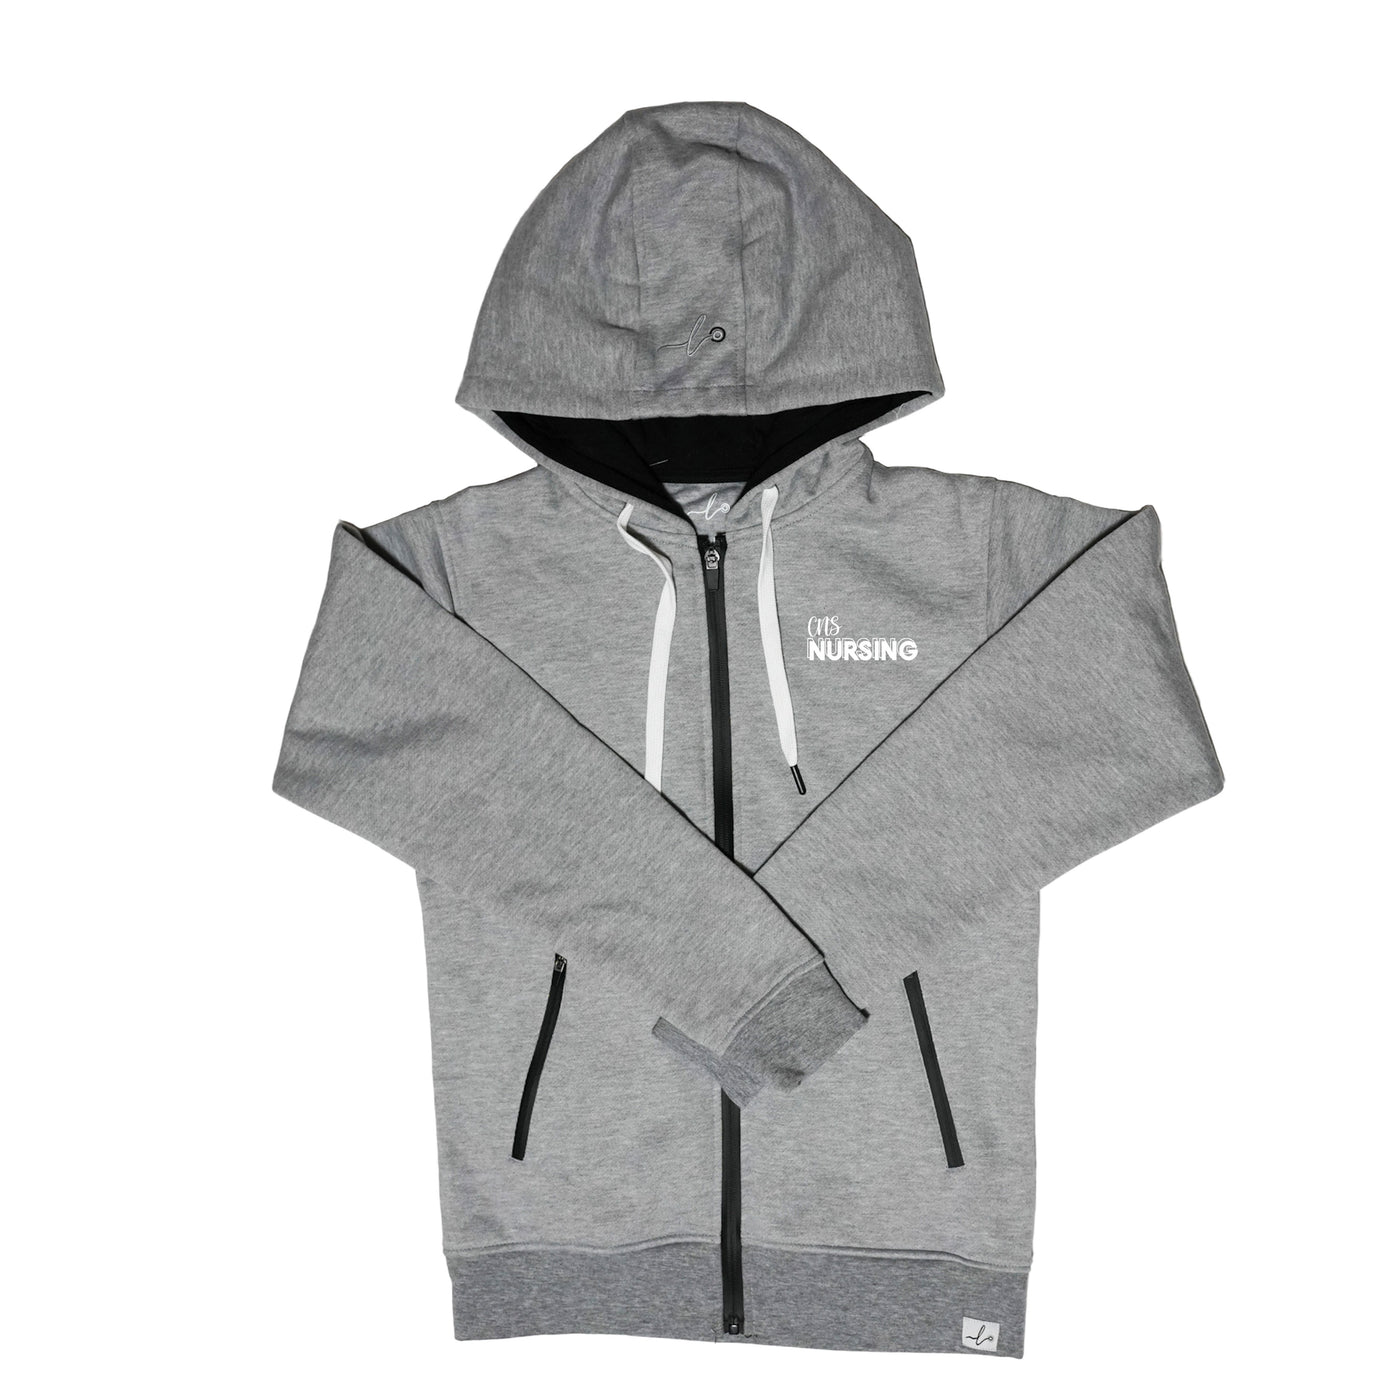 CNS BScN Class of 2027 - PRN Lux Hoodie